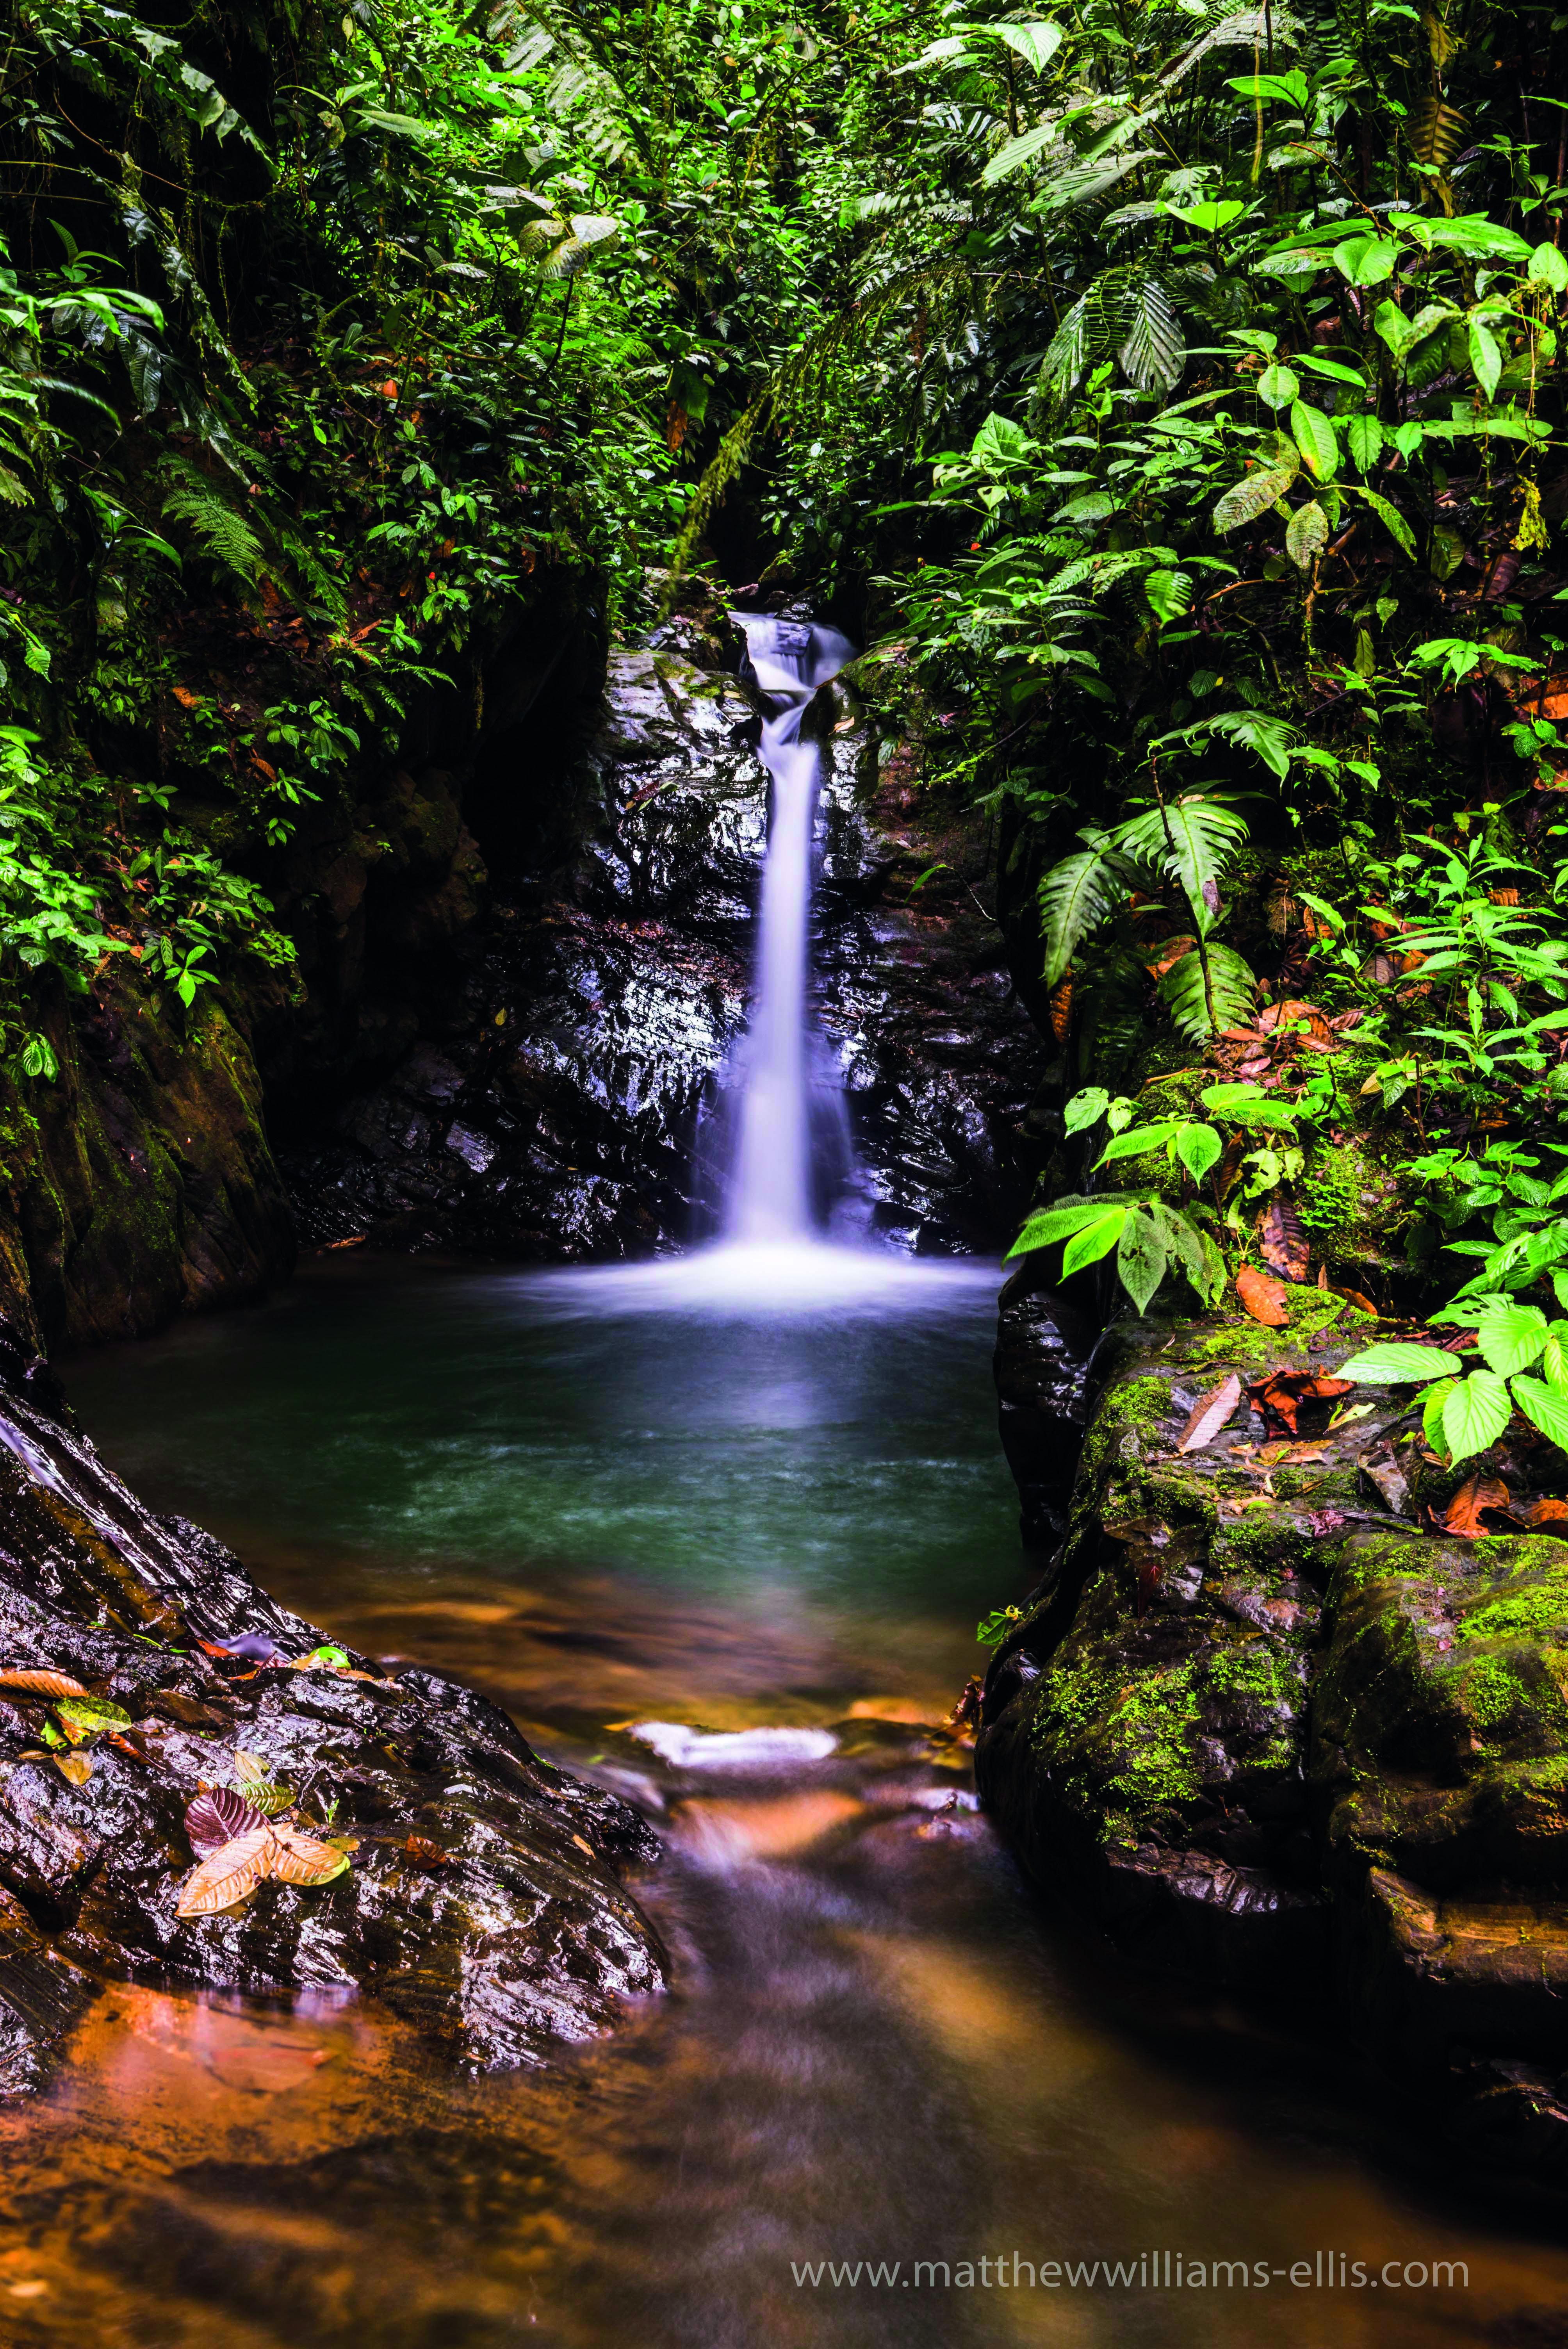 Cucharillos Waterfall in the Choco Rainforest, Ecuador. This area of jungle is the Mashpi Cloud Forest in the Pichincha Province of Ecuador, South America